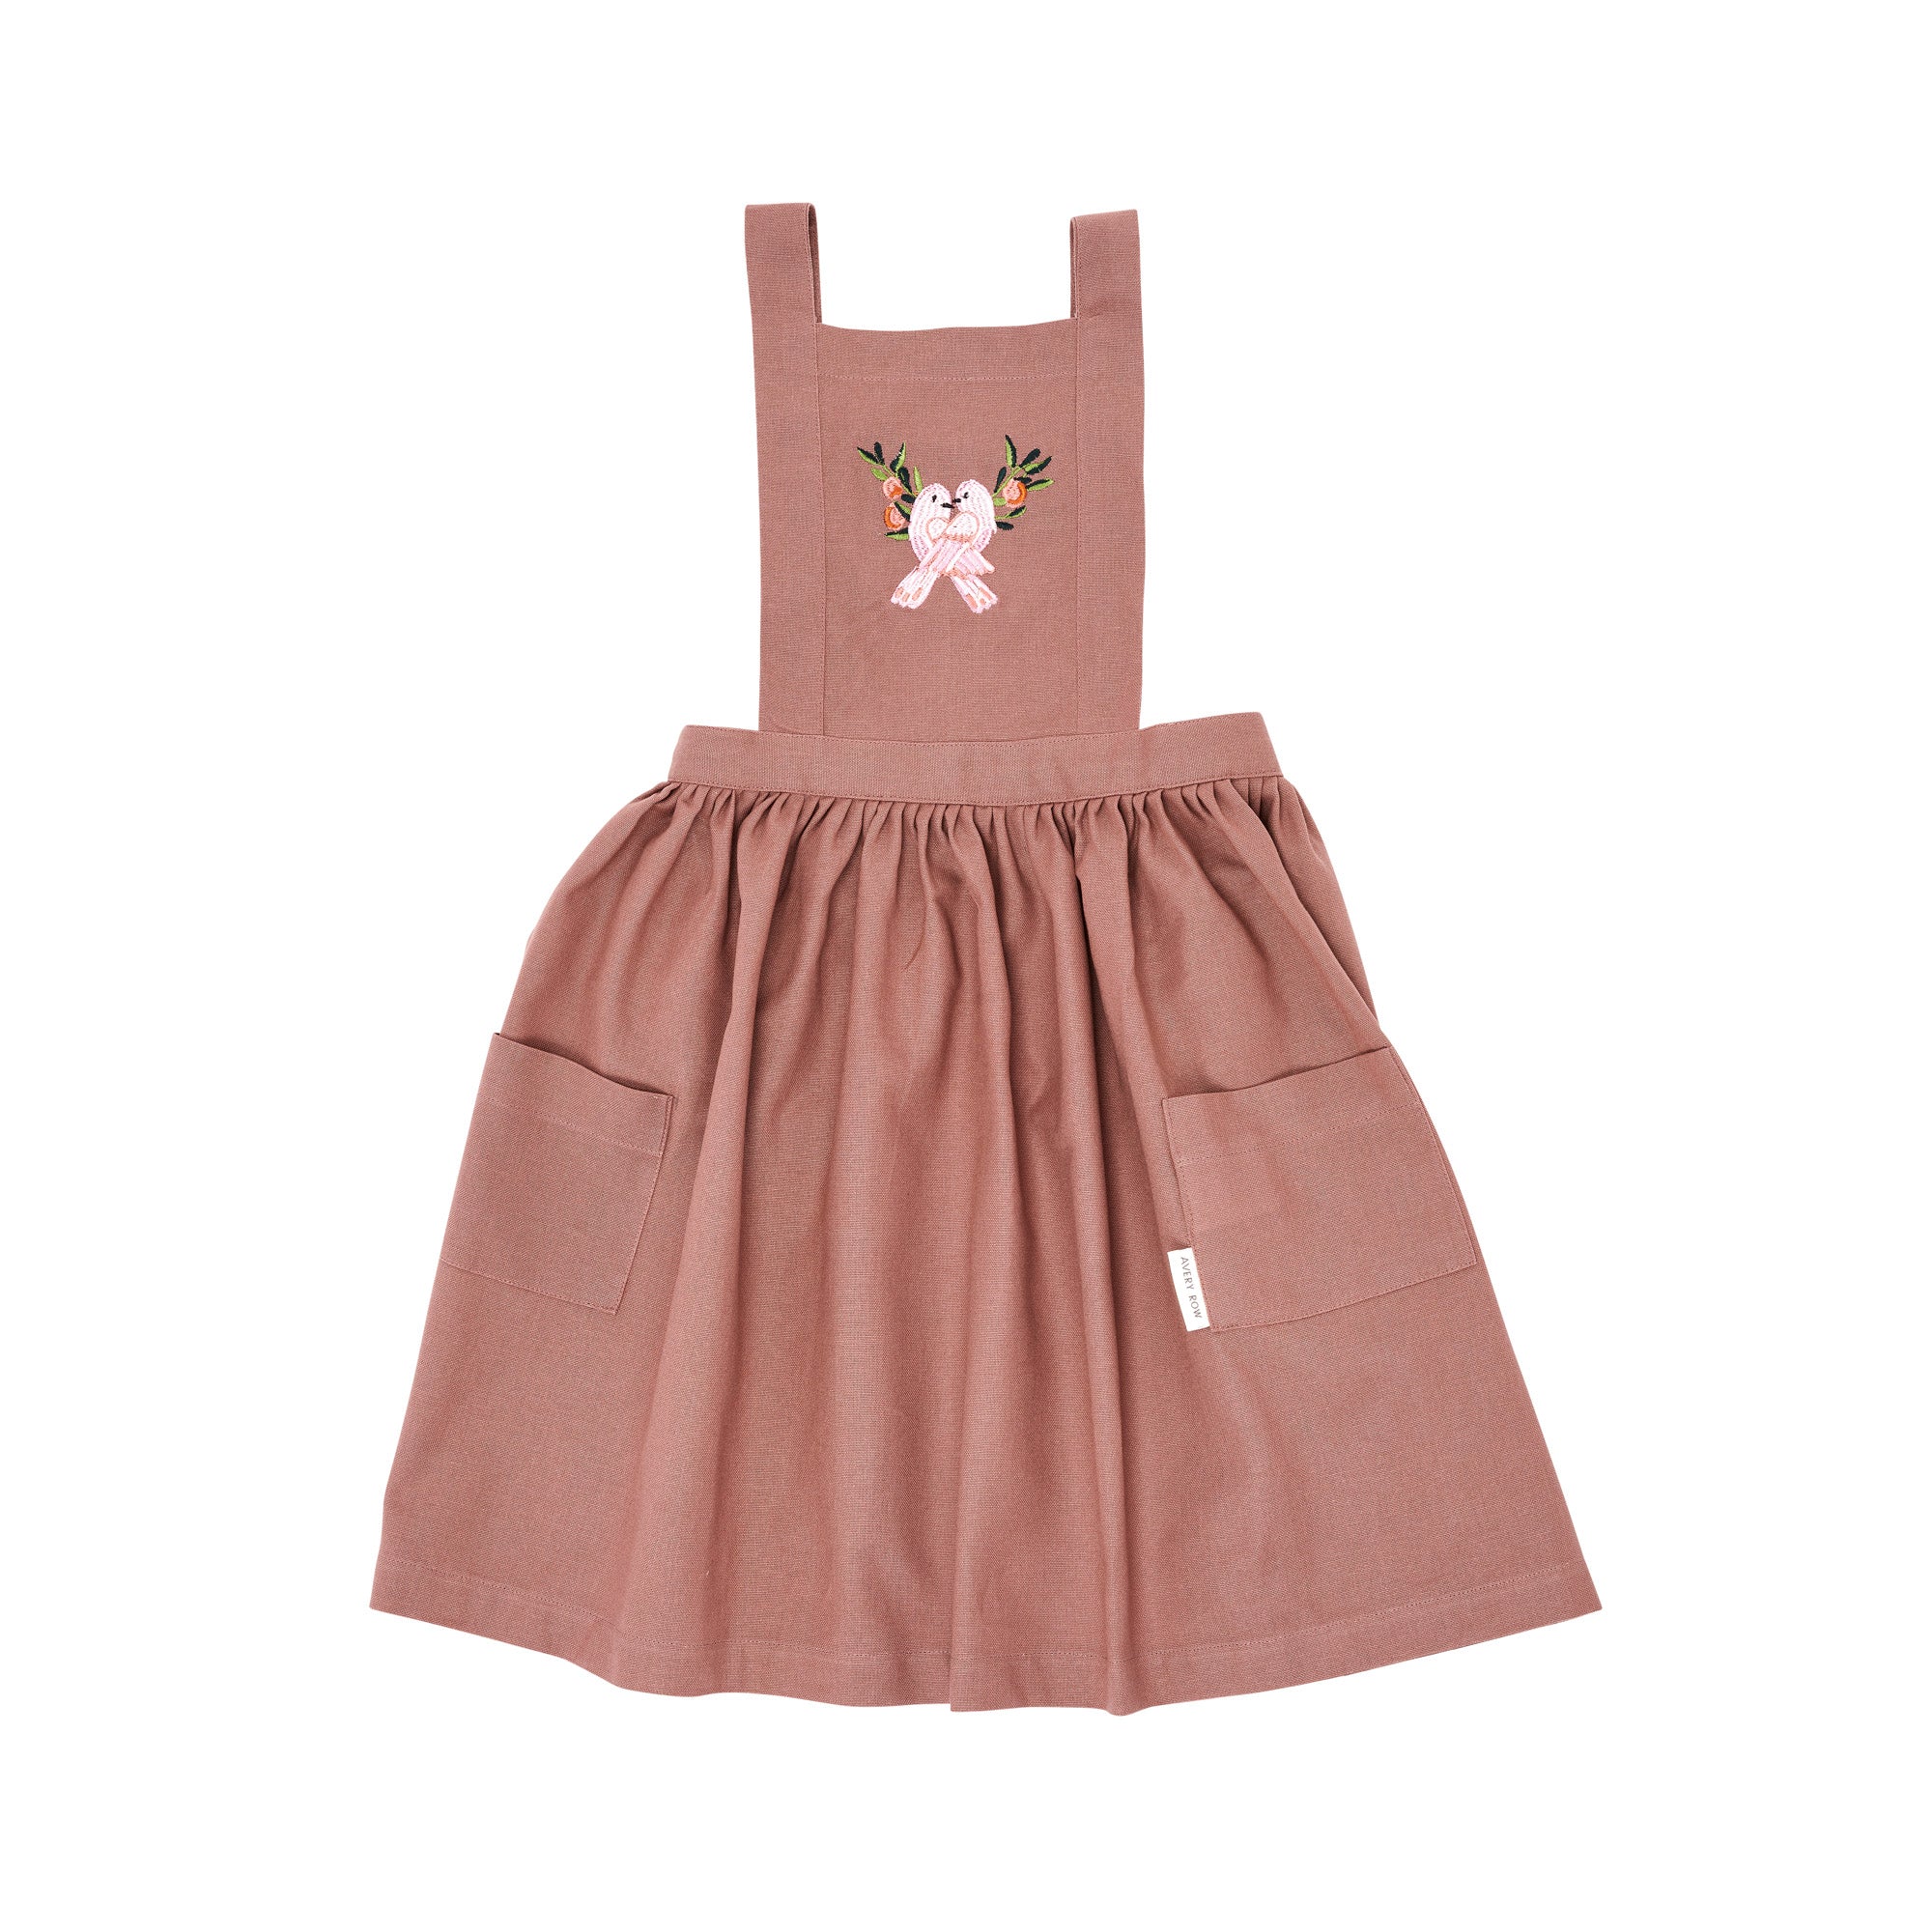 Kid's Pinafore Apron, Embroidered - Love Birds - Avery Row